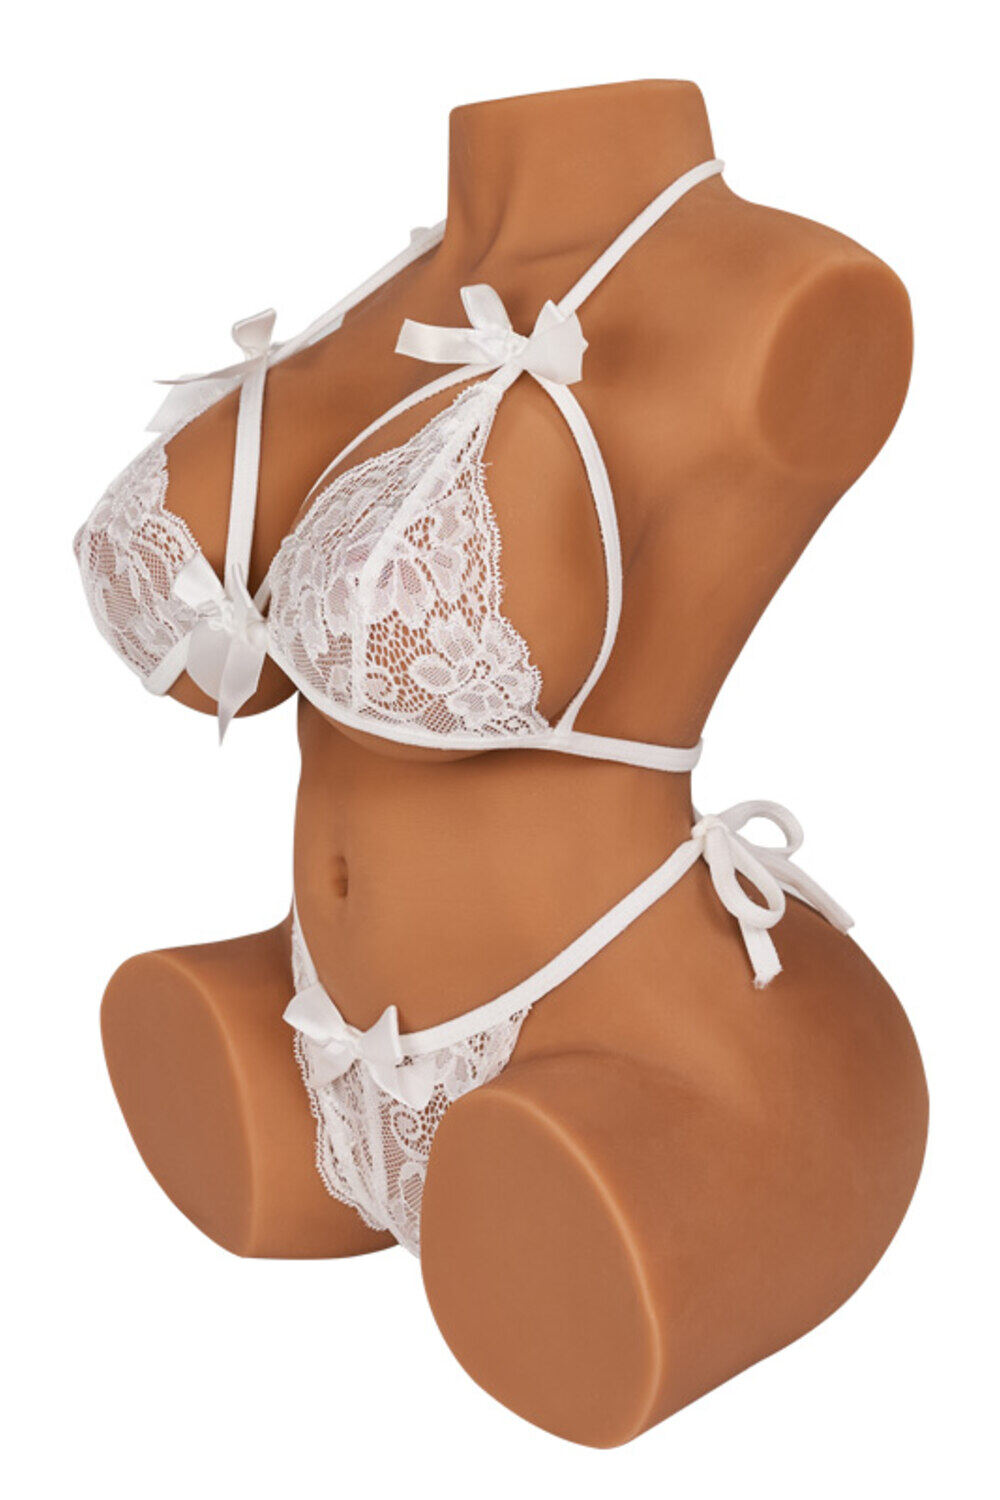 Mara Pretty 48.5cm(1ft7) G-Cup Tantaly Sex Real Doll (In Stock) image12